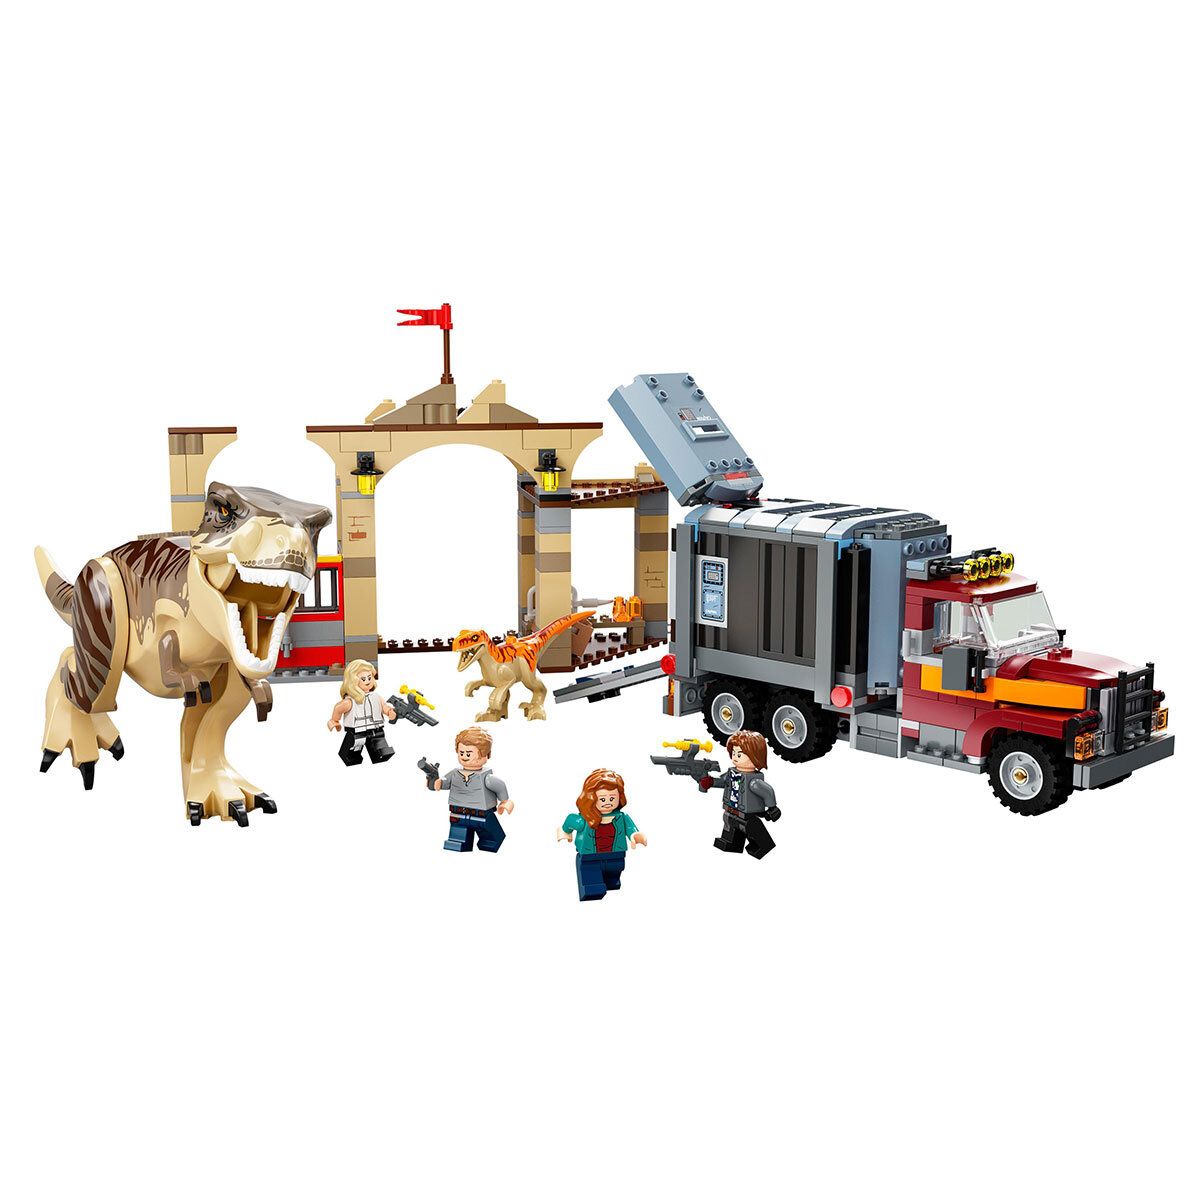 Buy LEGO Jurassic World Dinosaur Breakout Overview Image at Costco.co.uk